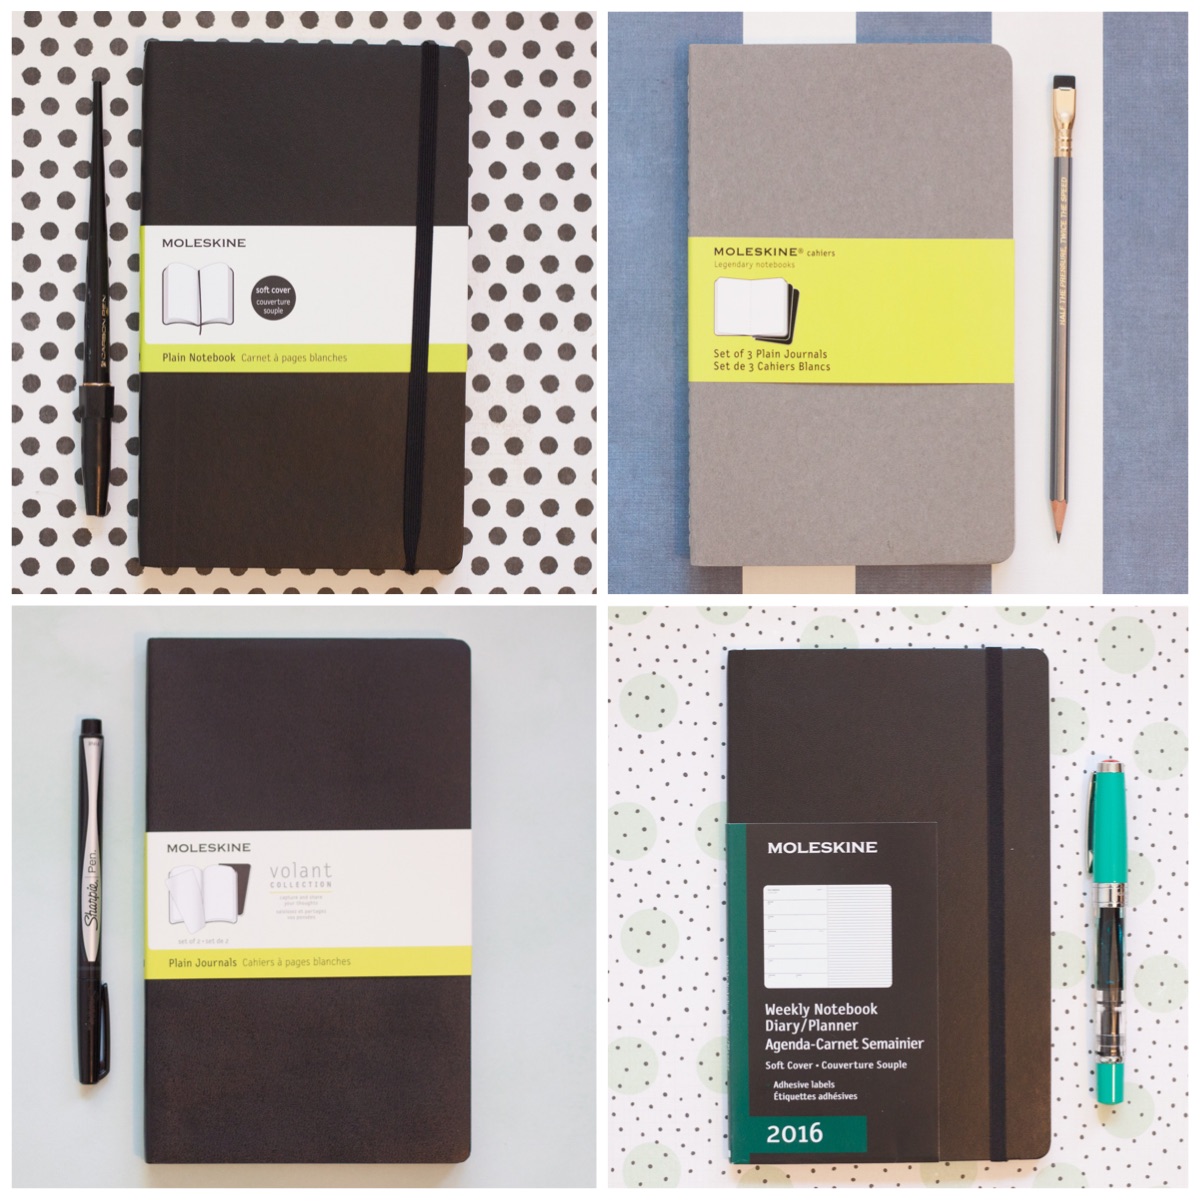 Clairefontaine Classic Side Spiral Bound Notebook (6 x 8.25)